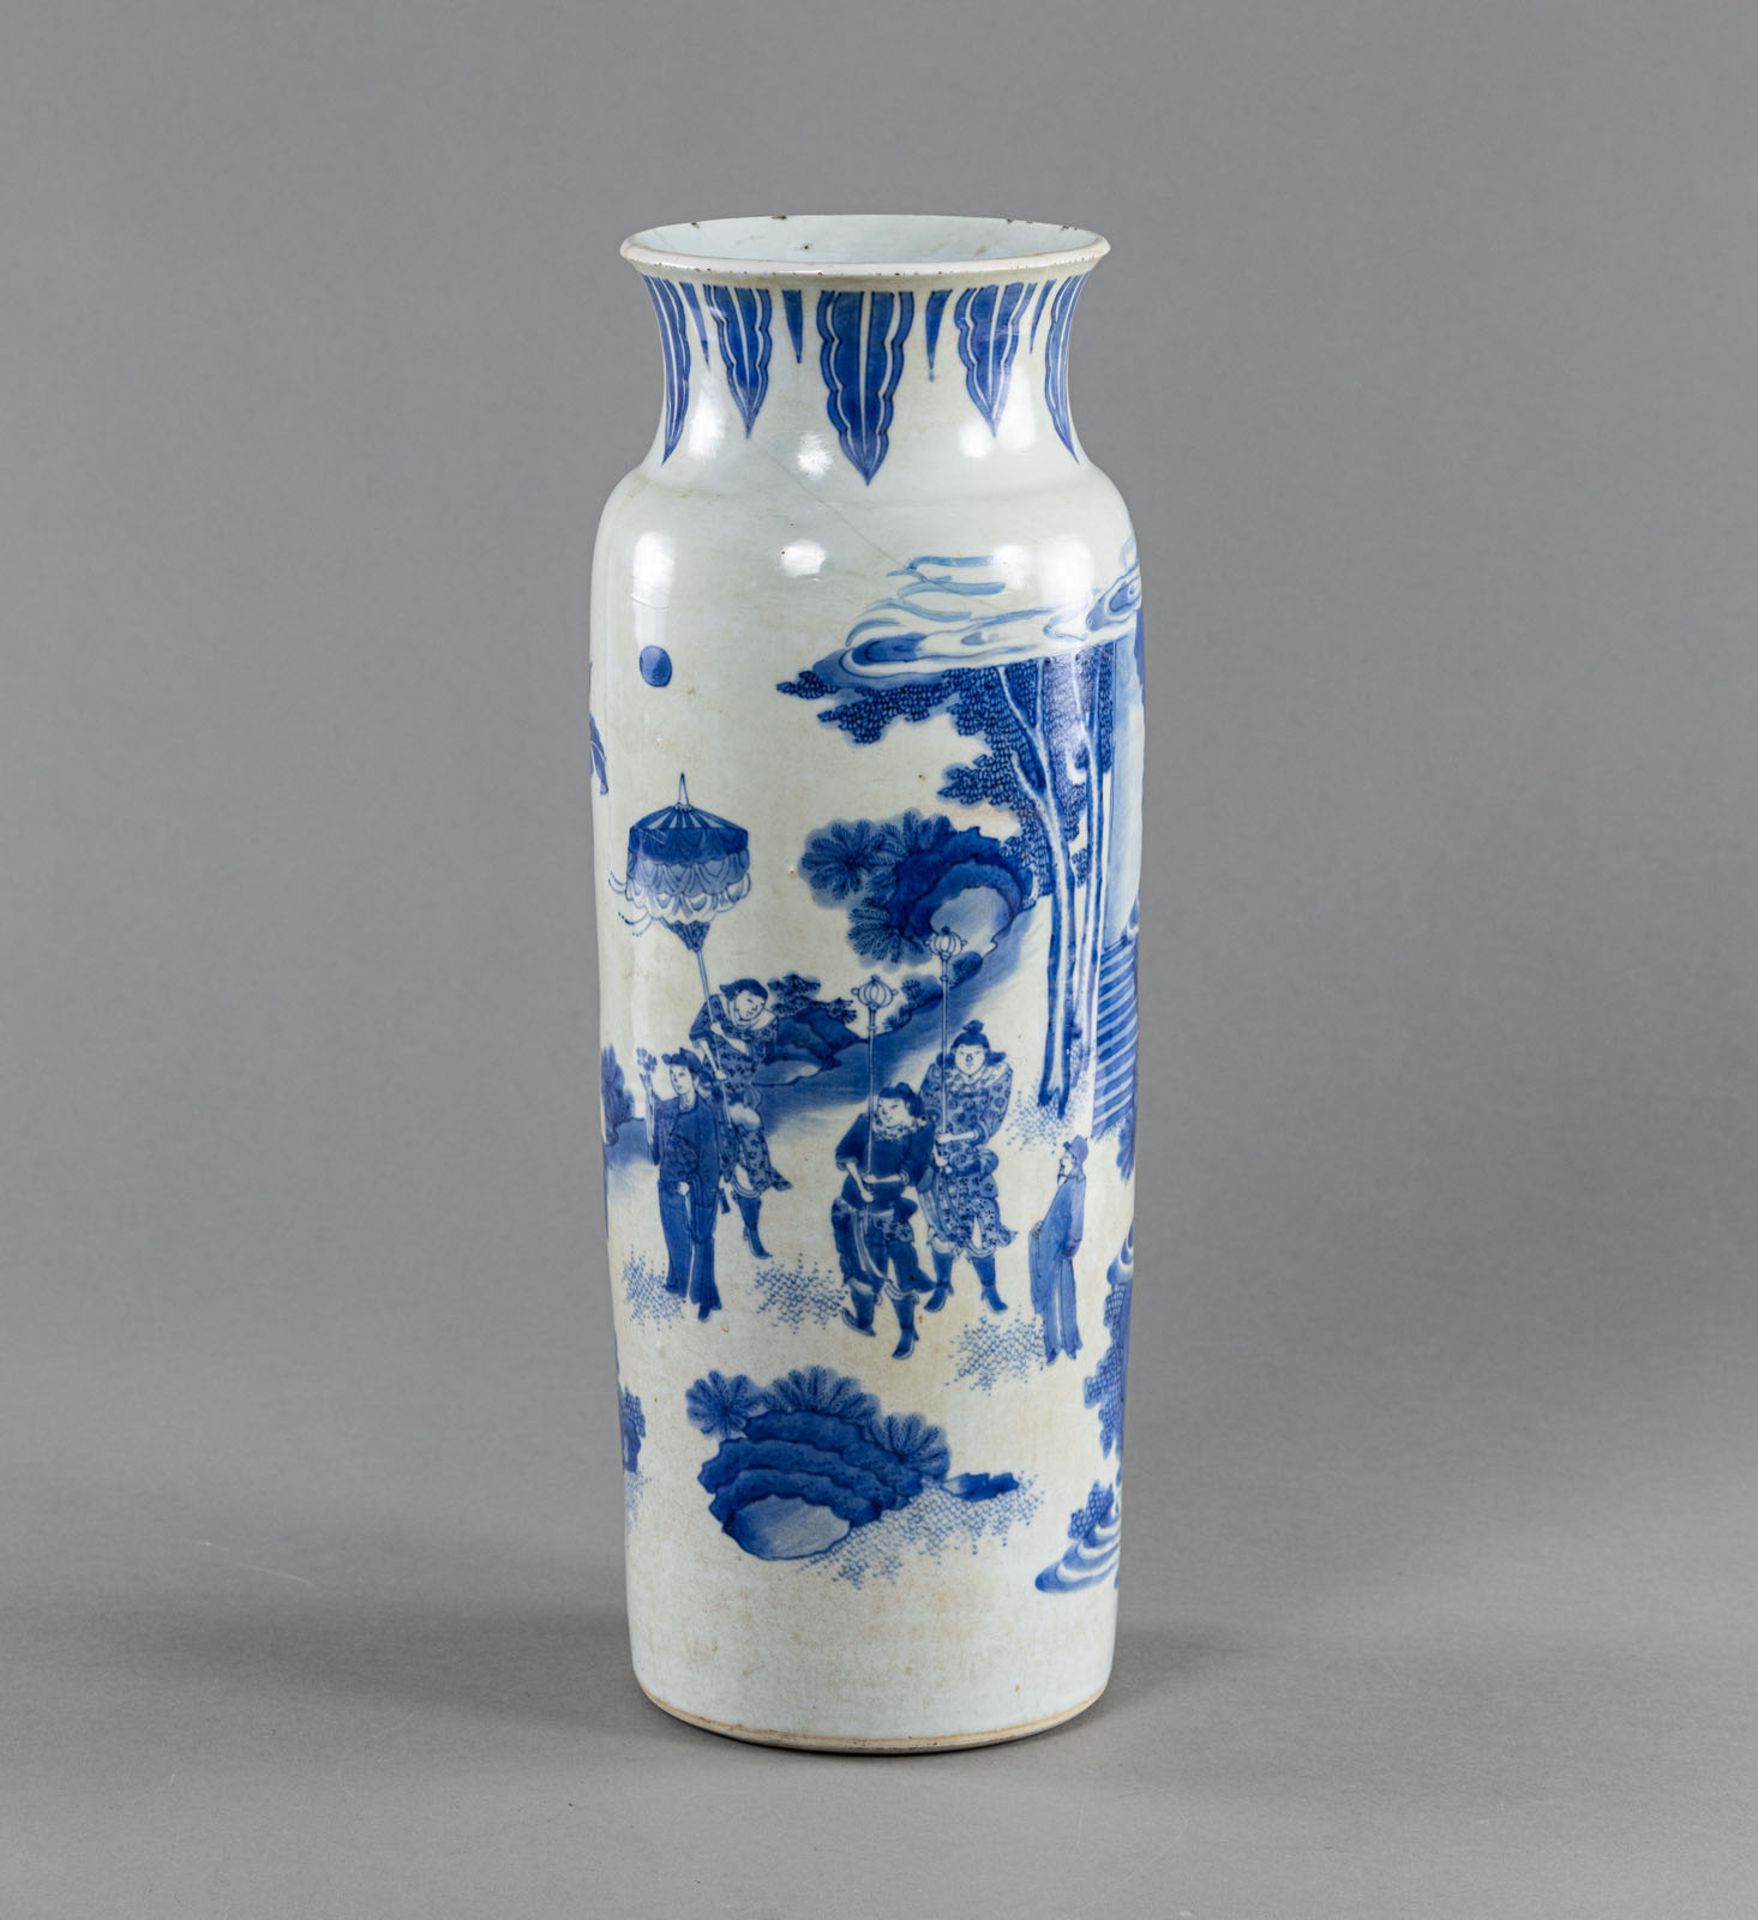 A BLUE AND WHITE ROULEAU VASE WITH A FIGURAL SCENE